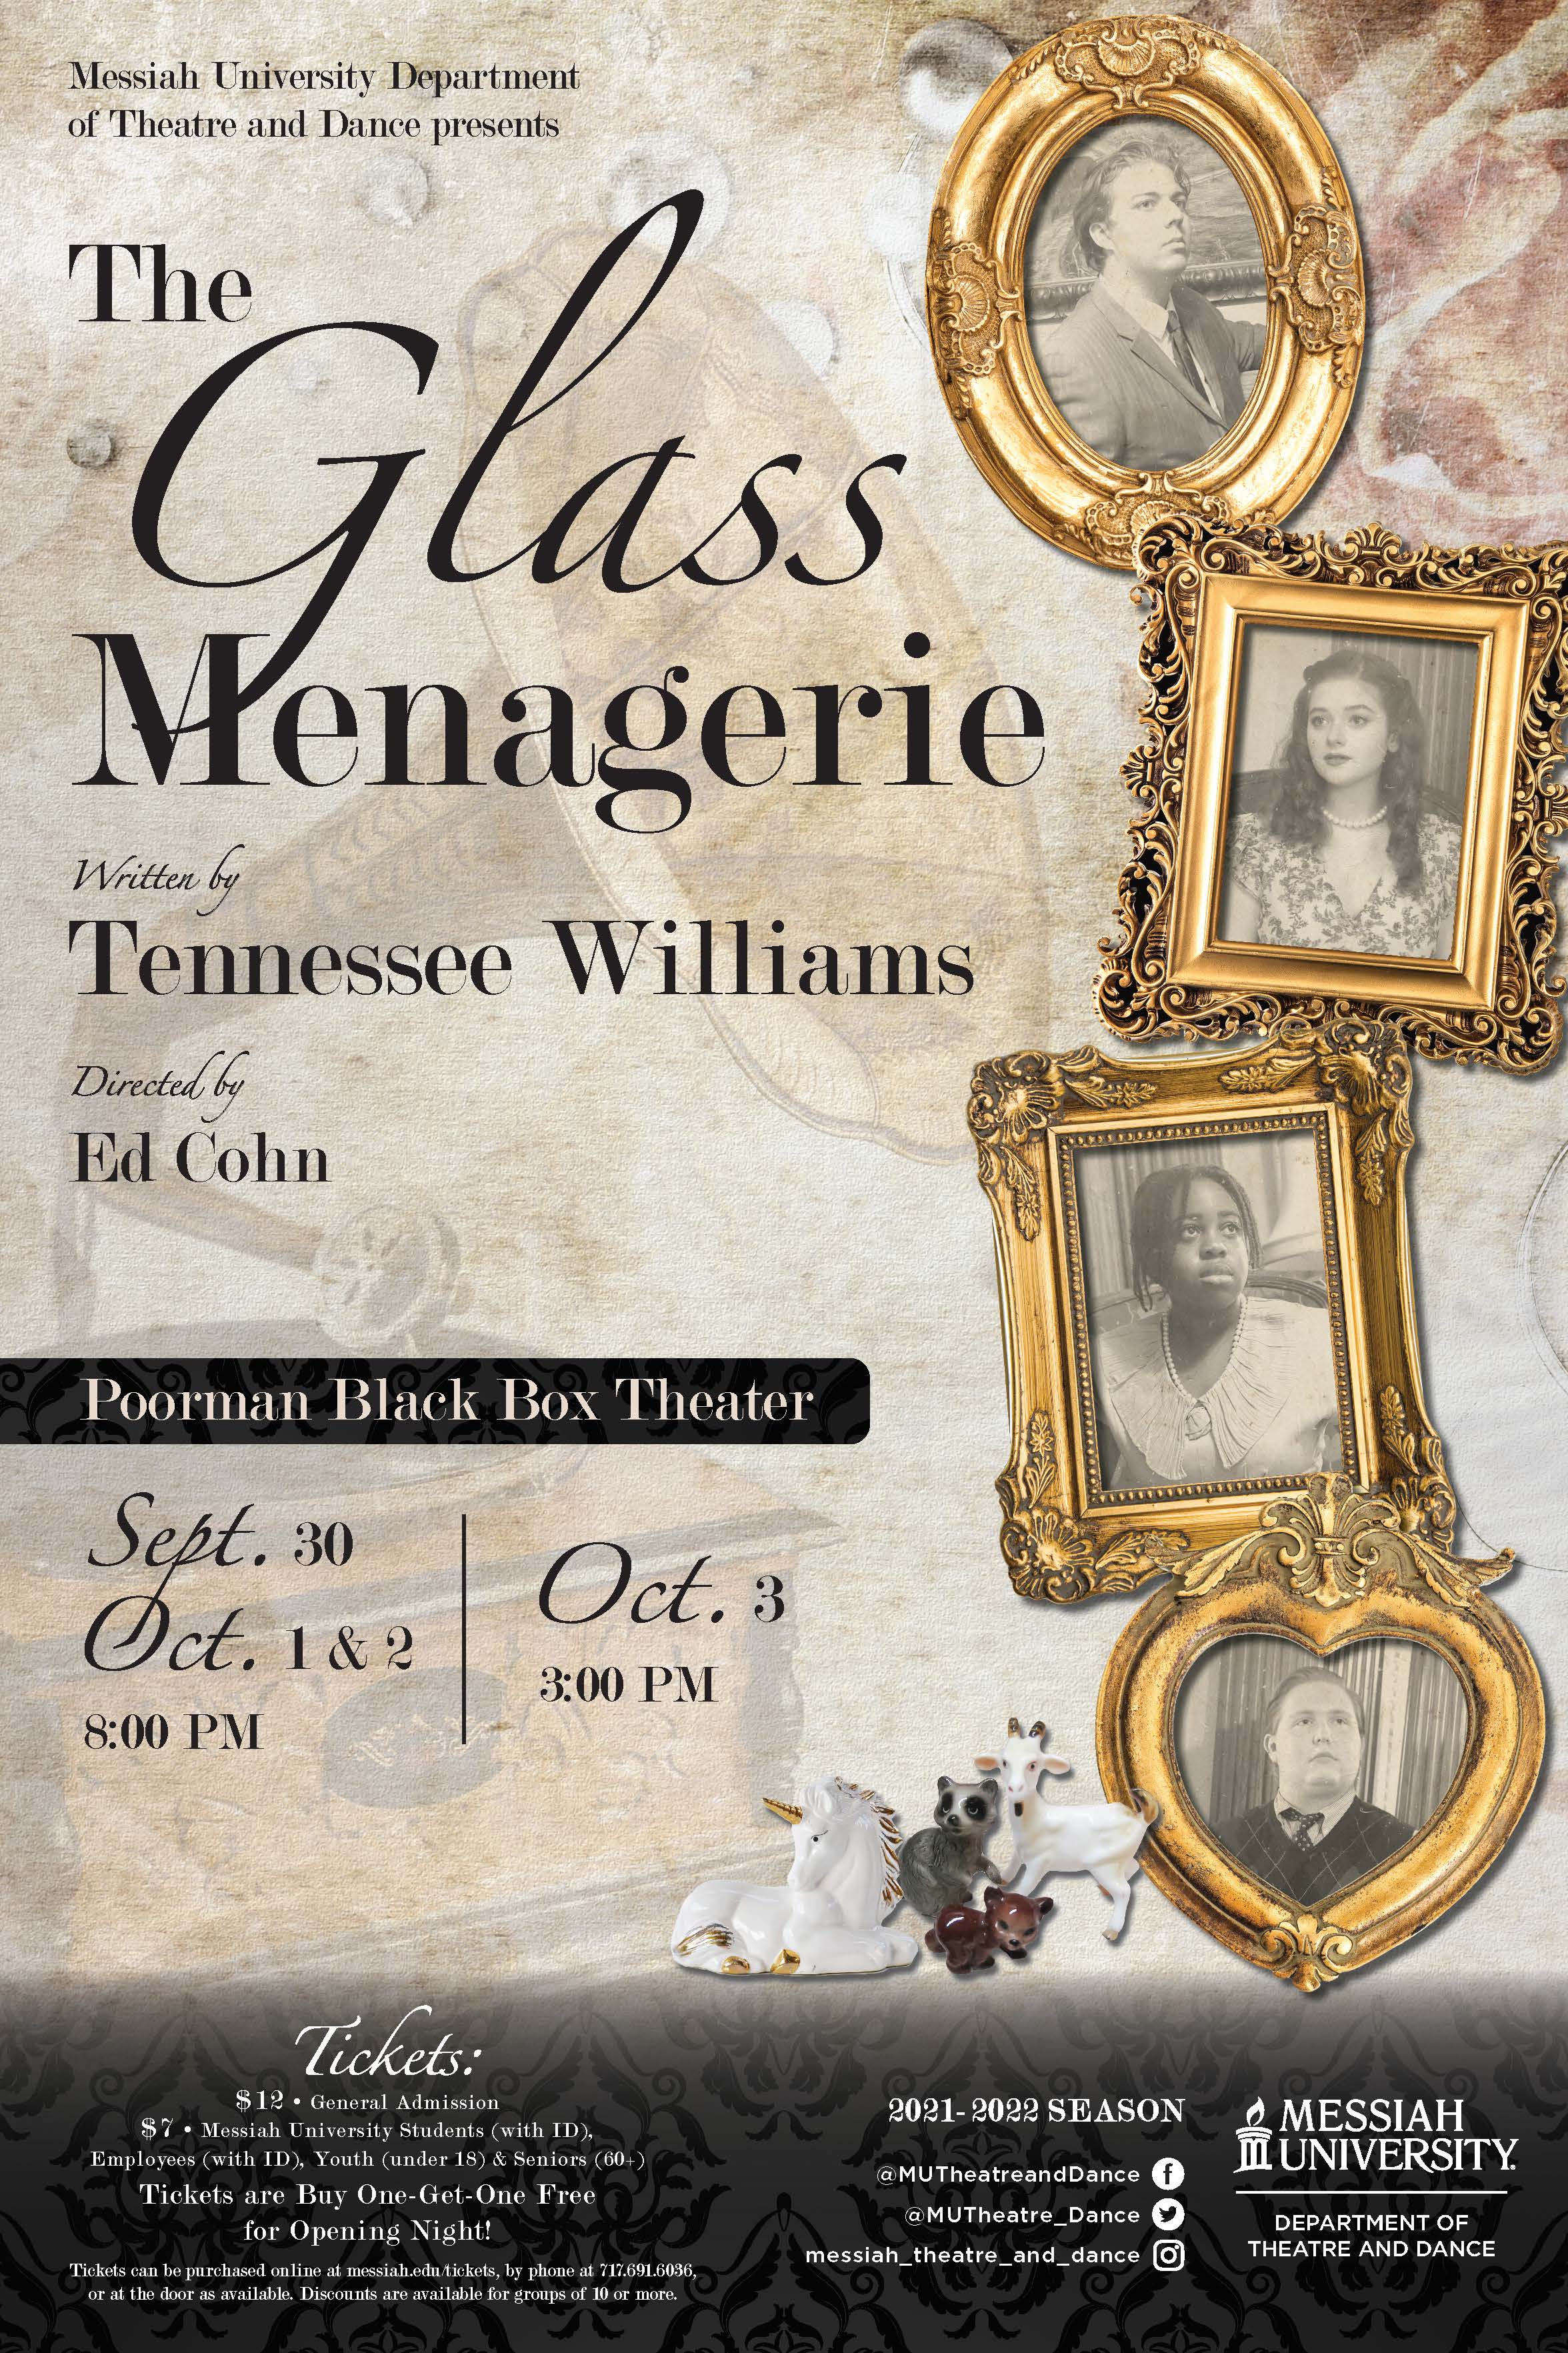 5731 The glass menagerie marquee poster